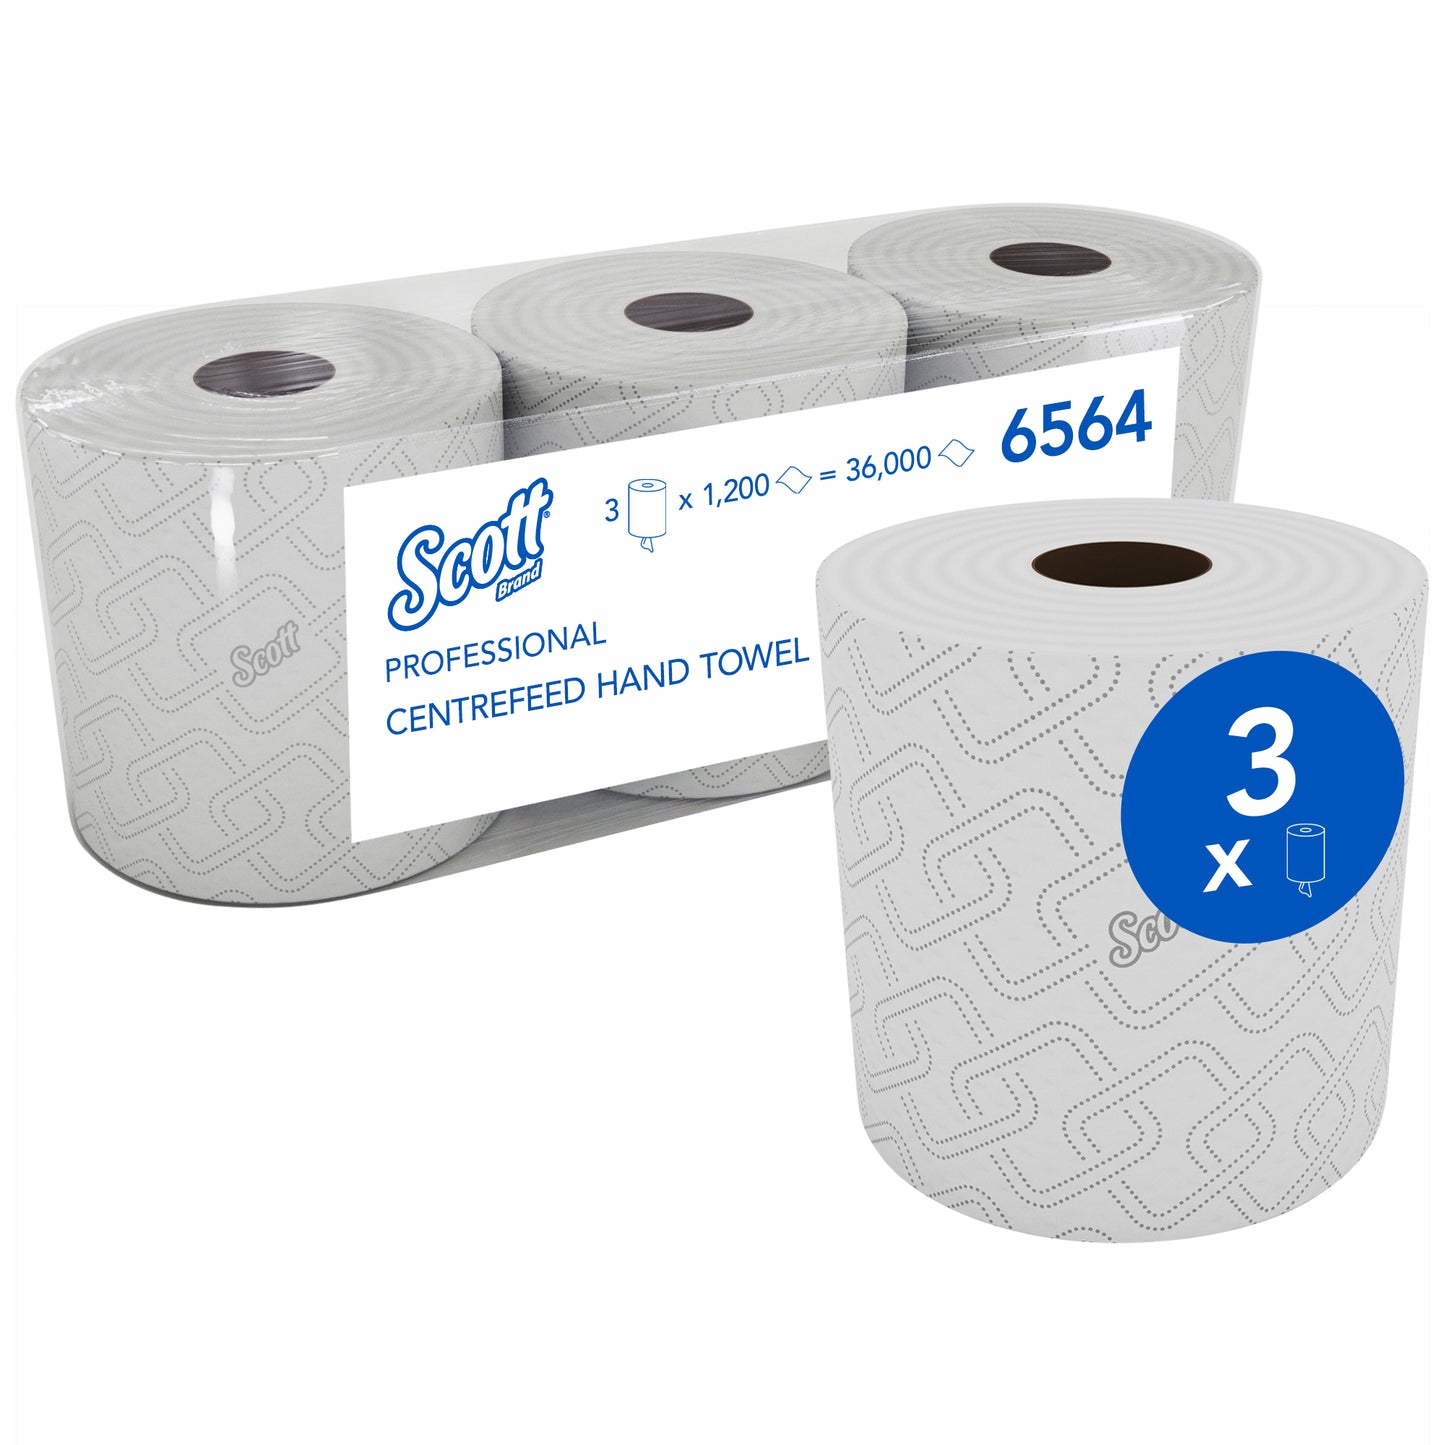 KIMBERLY-CLARK SCOTT CONTROL Barrel Rolled Hand Towel - 1 Ply (Pack of 3 Rolls) (Code 6564)